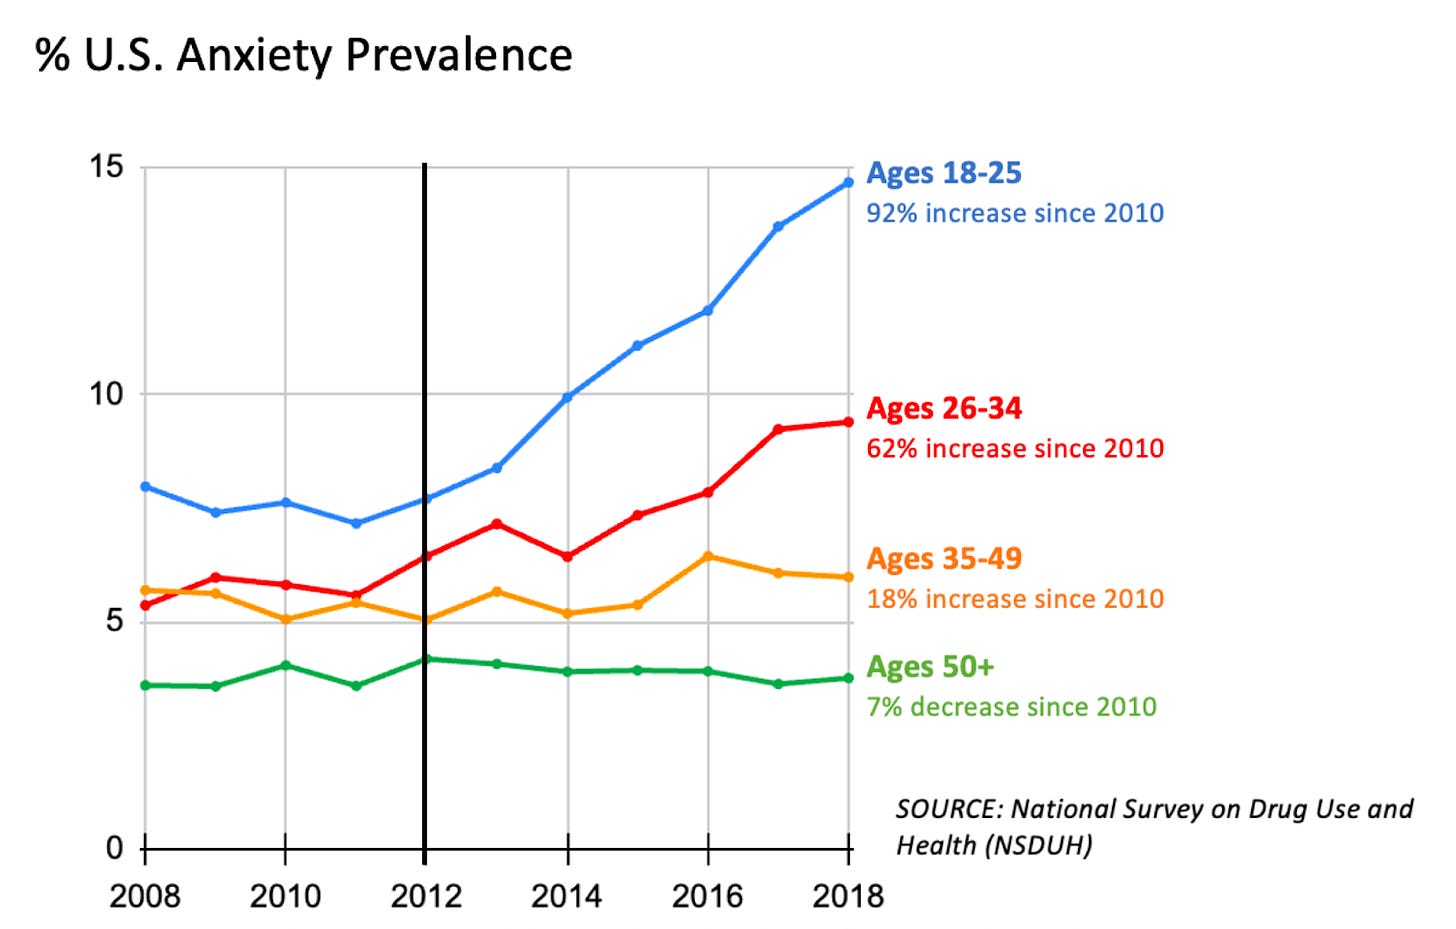 Percent U.S. anxiety prevalence across age groups. 92% increase for those 18-25 since 2010, 62% increase for 26-34, 18% increase for 35-49, and 7% decrease for those 50+